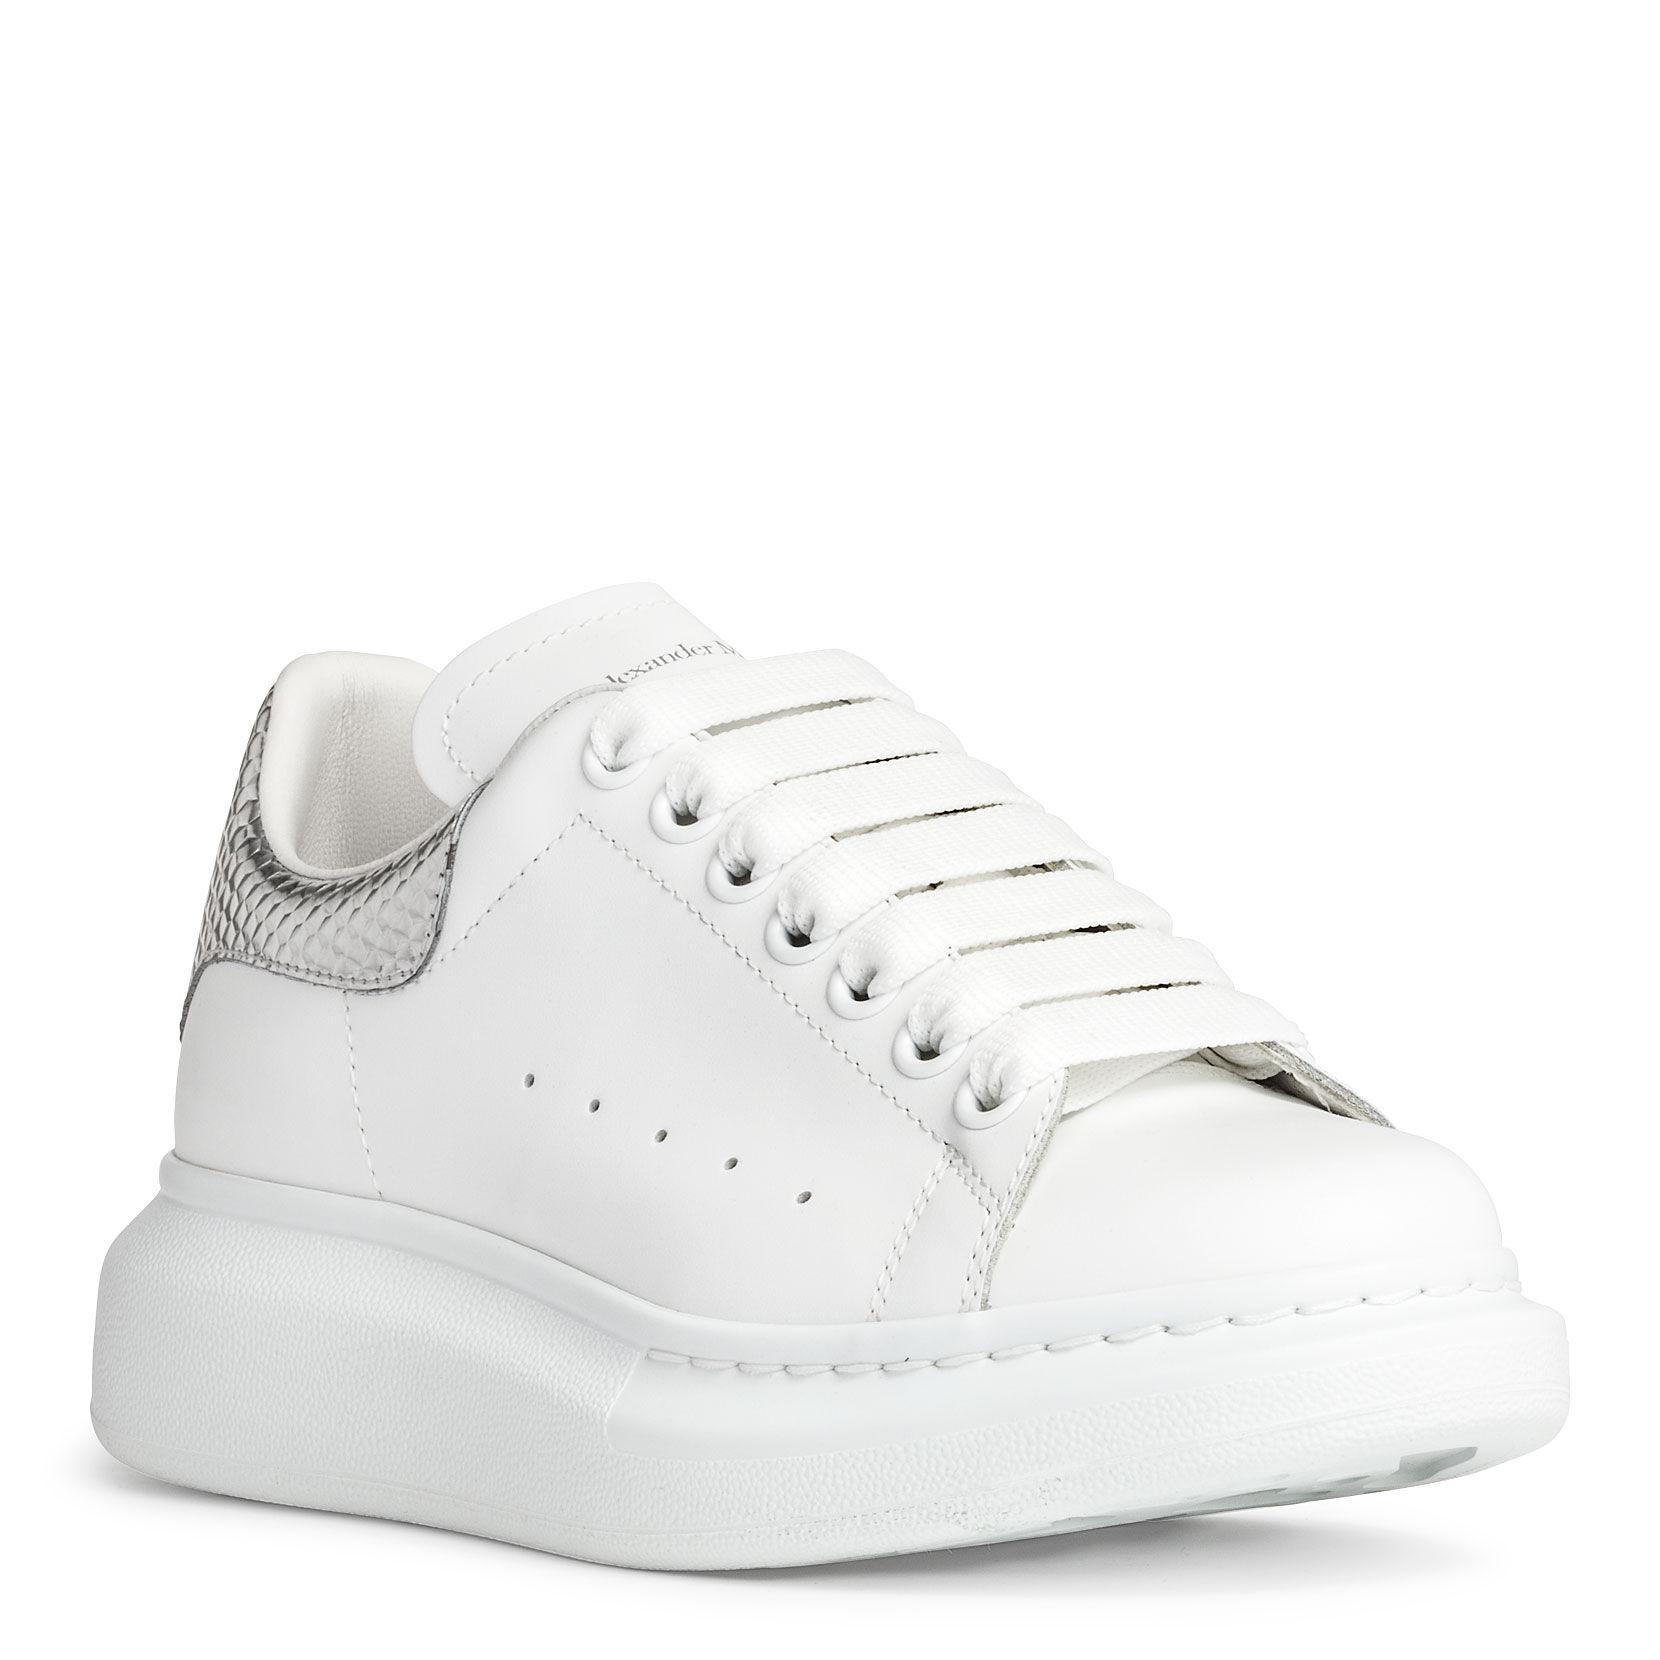 Alexander McQueen Leather White & Silver Oversized Sneakers - Lyst